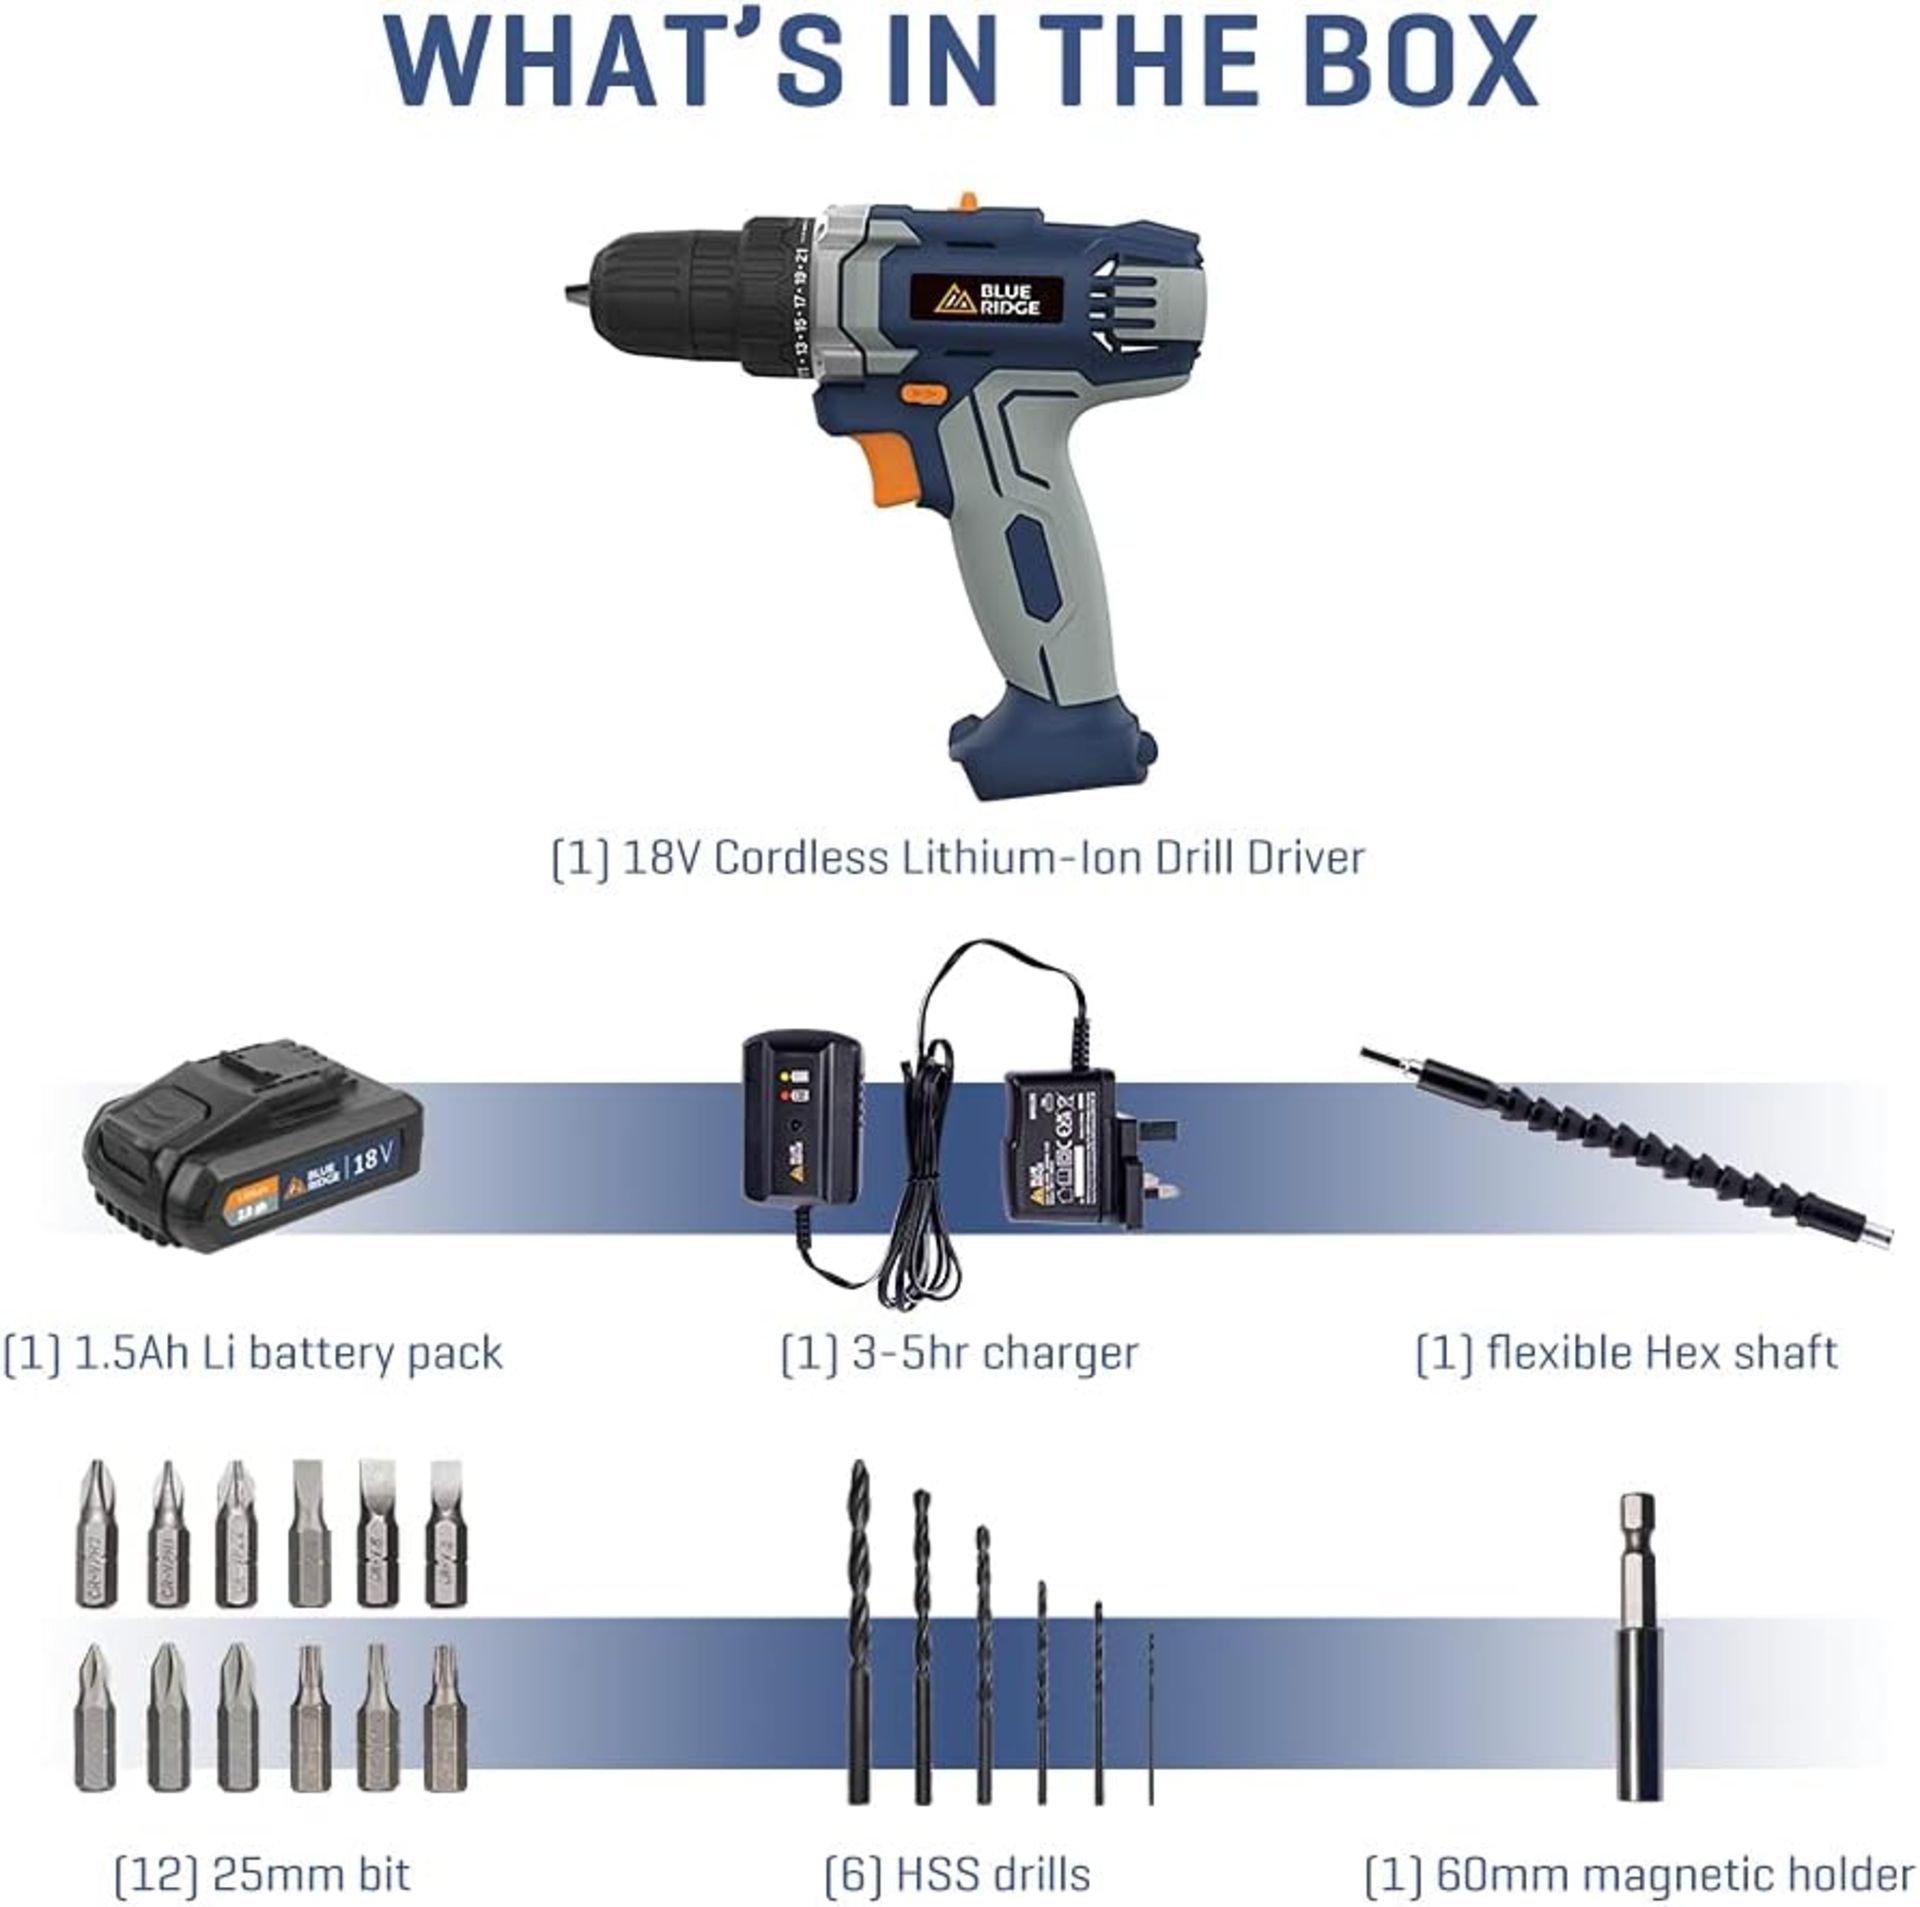 TRADE OT TO CONTAIN 20x NEW & BOXED BLUE RIDGE 18V Cordless Drill Driver. RRP £89 EACH. The - Image 3 of 3